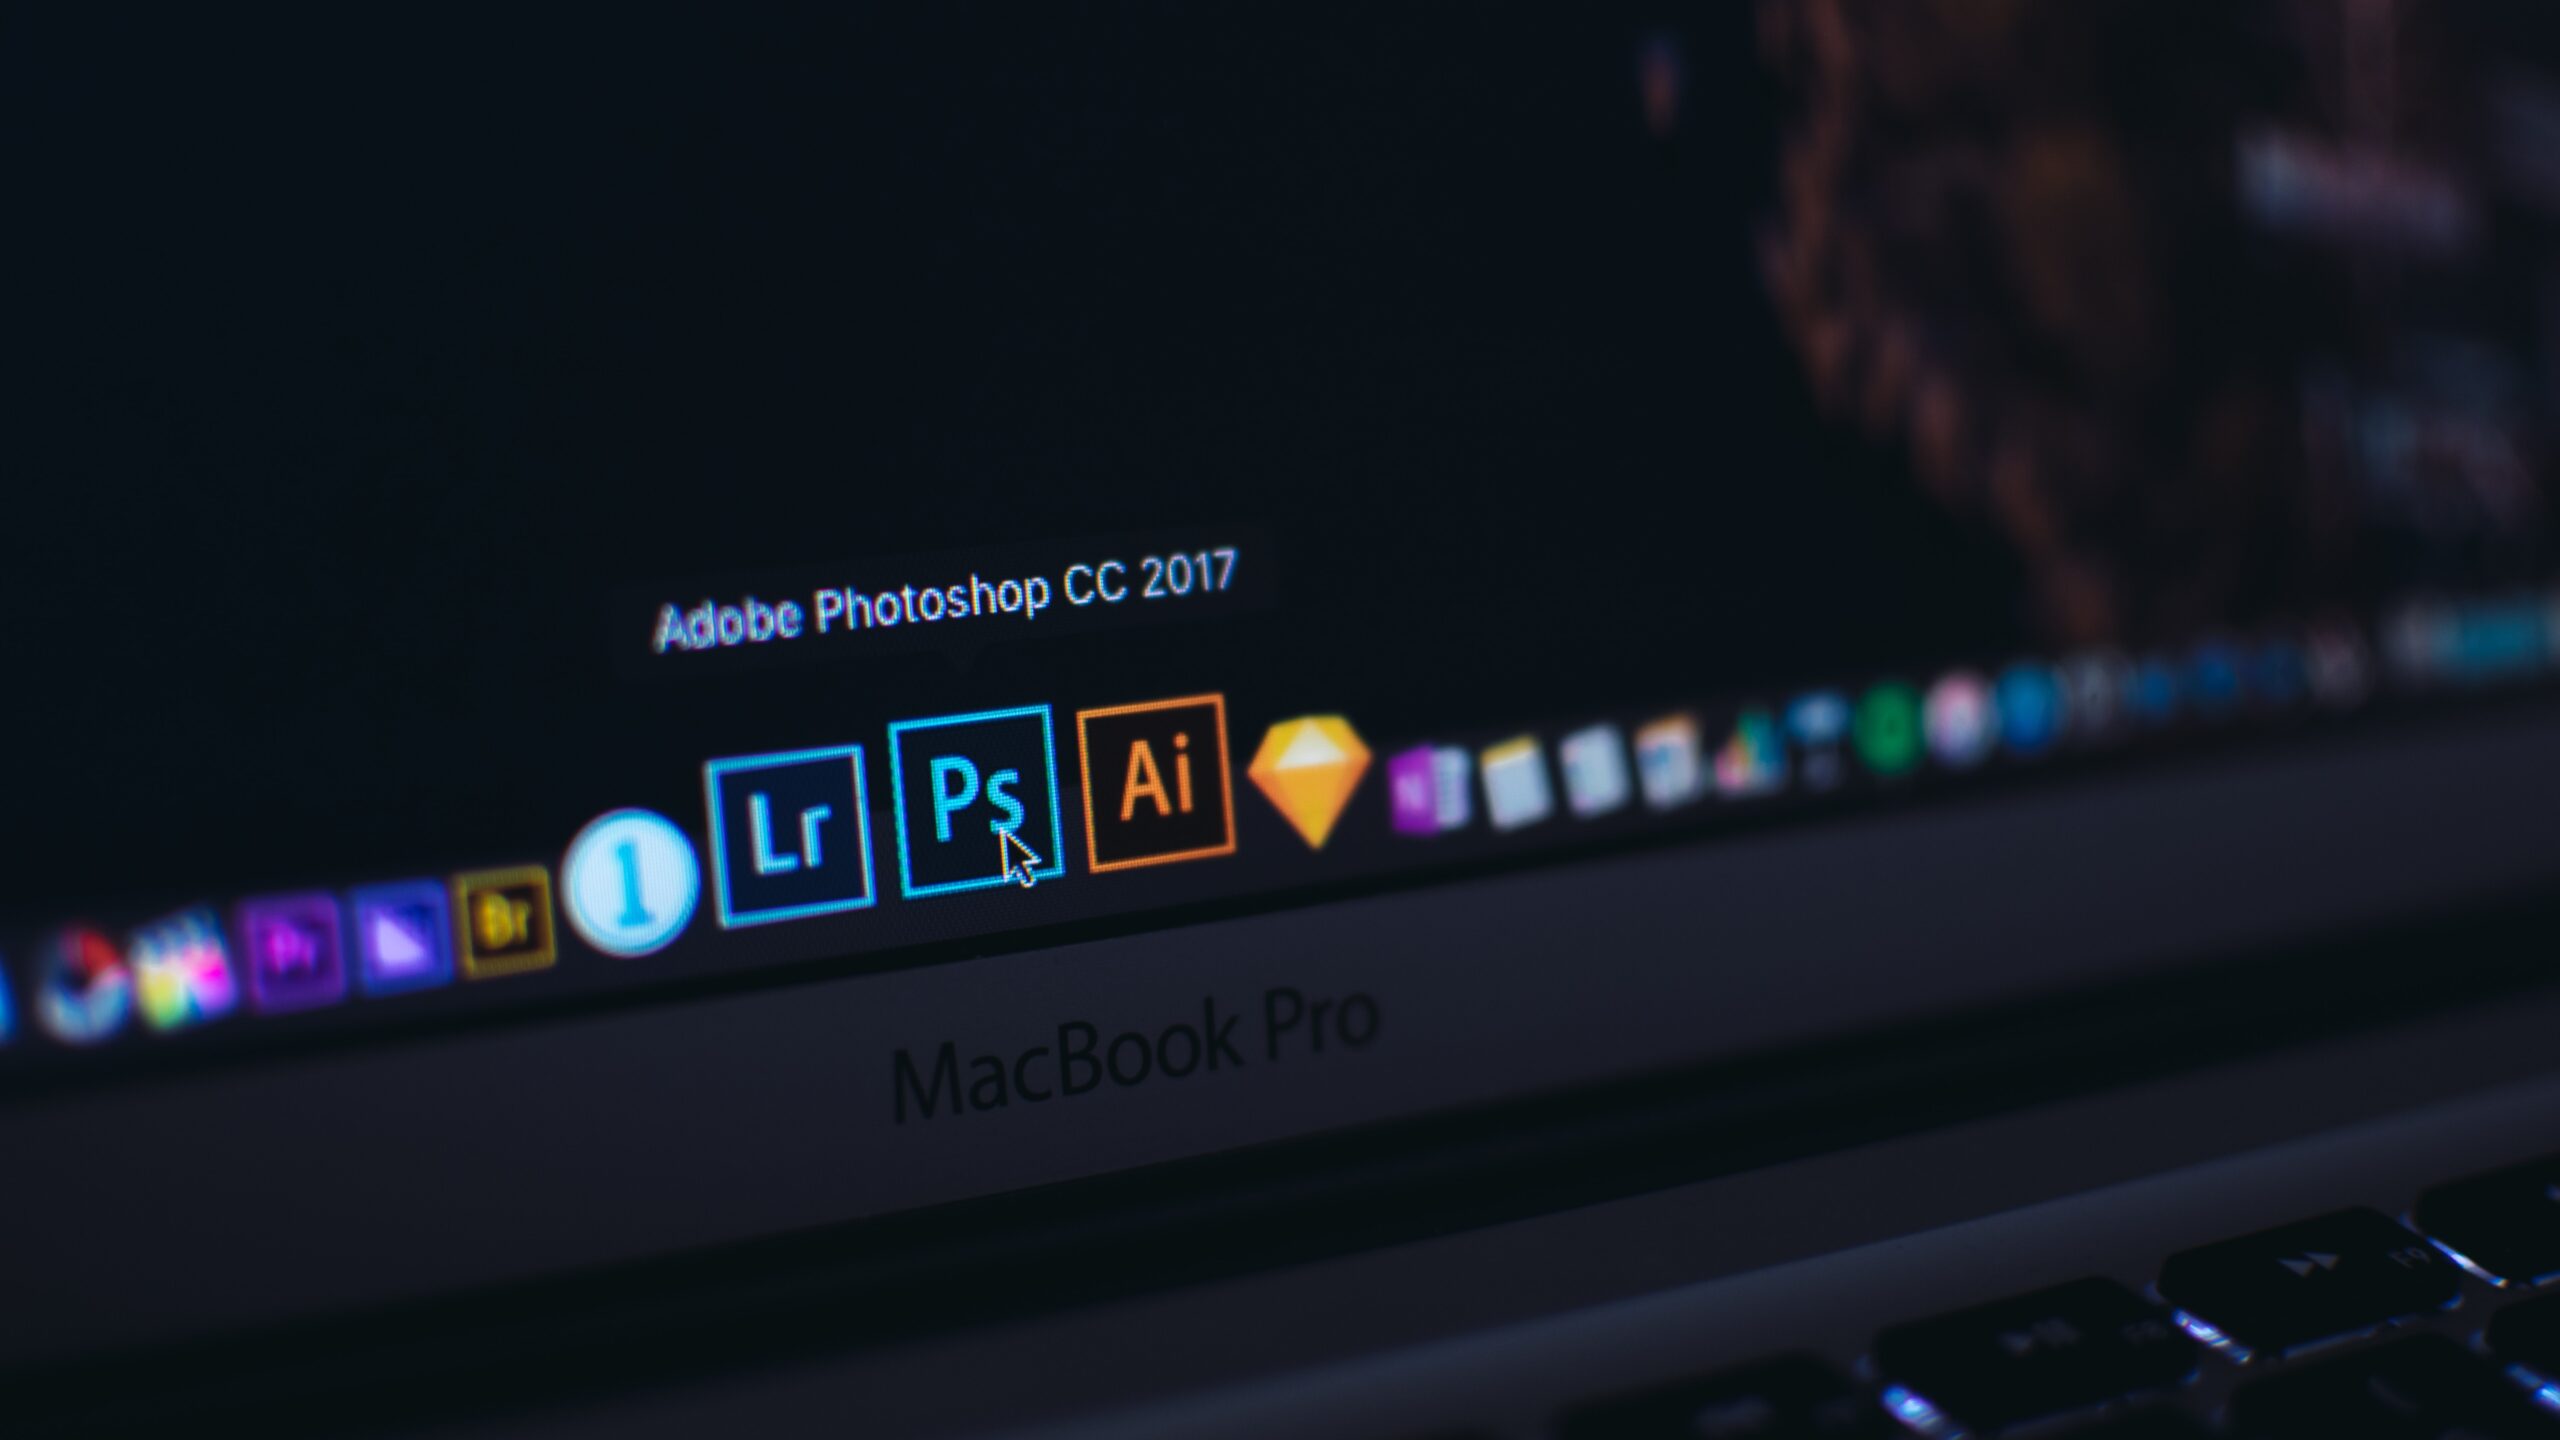 Adobe is integrating AI into Photoshop featured image